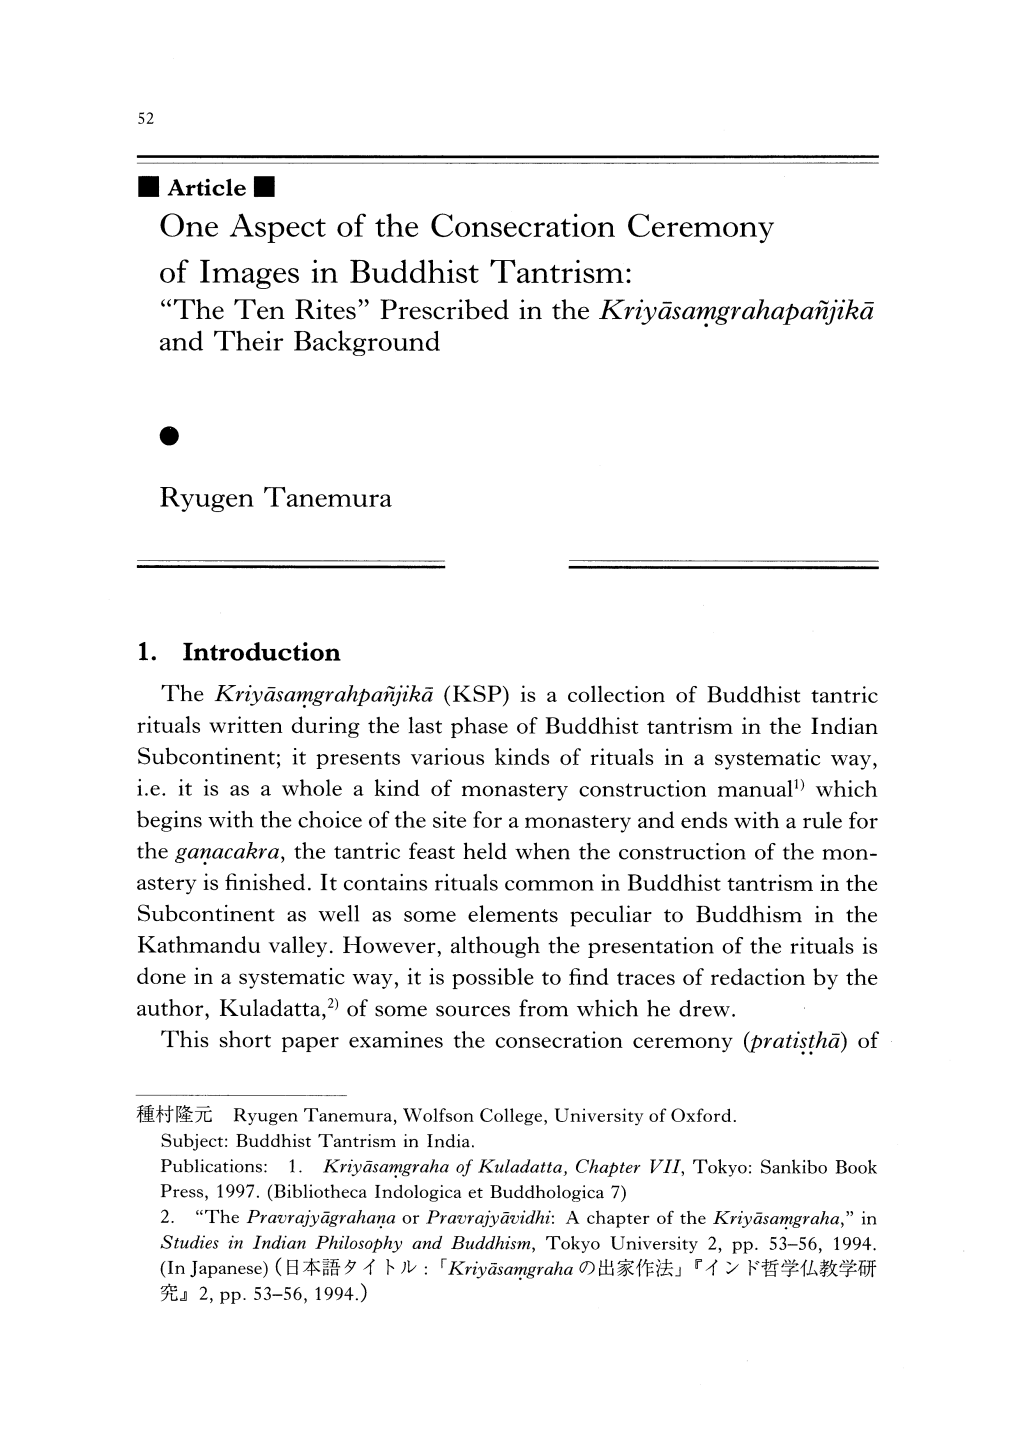 One Aspect of the Consecration Ceremony of Images in Buddhist Tantrism: "The Ten Rites" Prescribed in the Kriyasangrahapanjika and Their Background